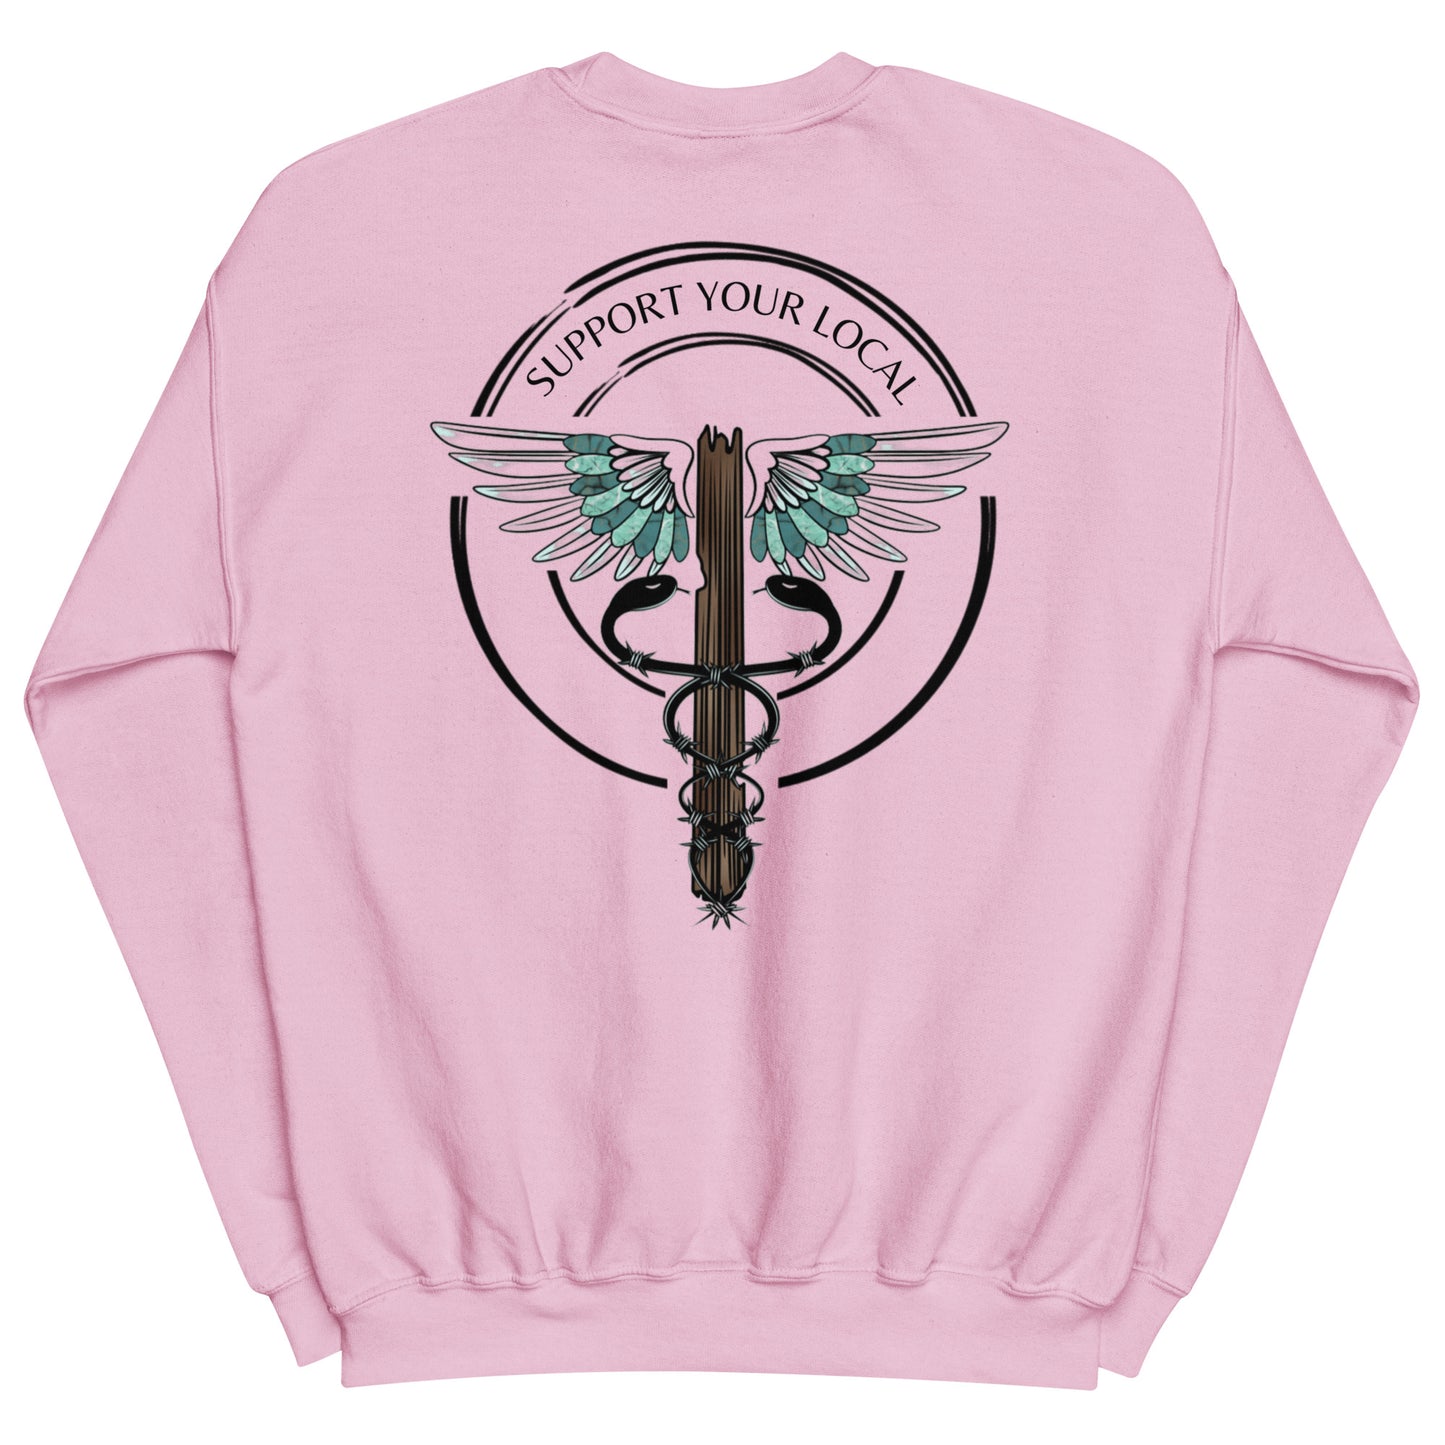 Support Your Local-Light Colors Unisex Crewneck